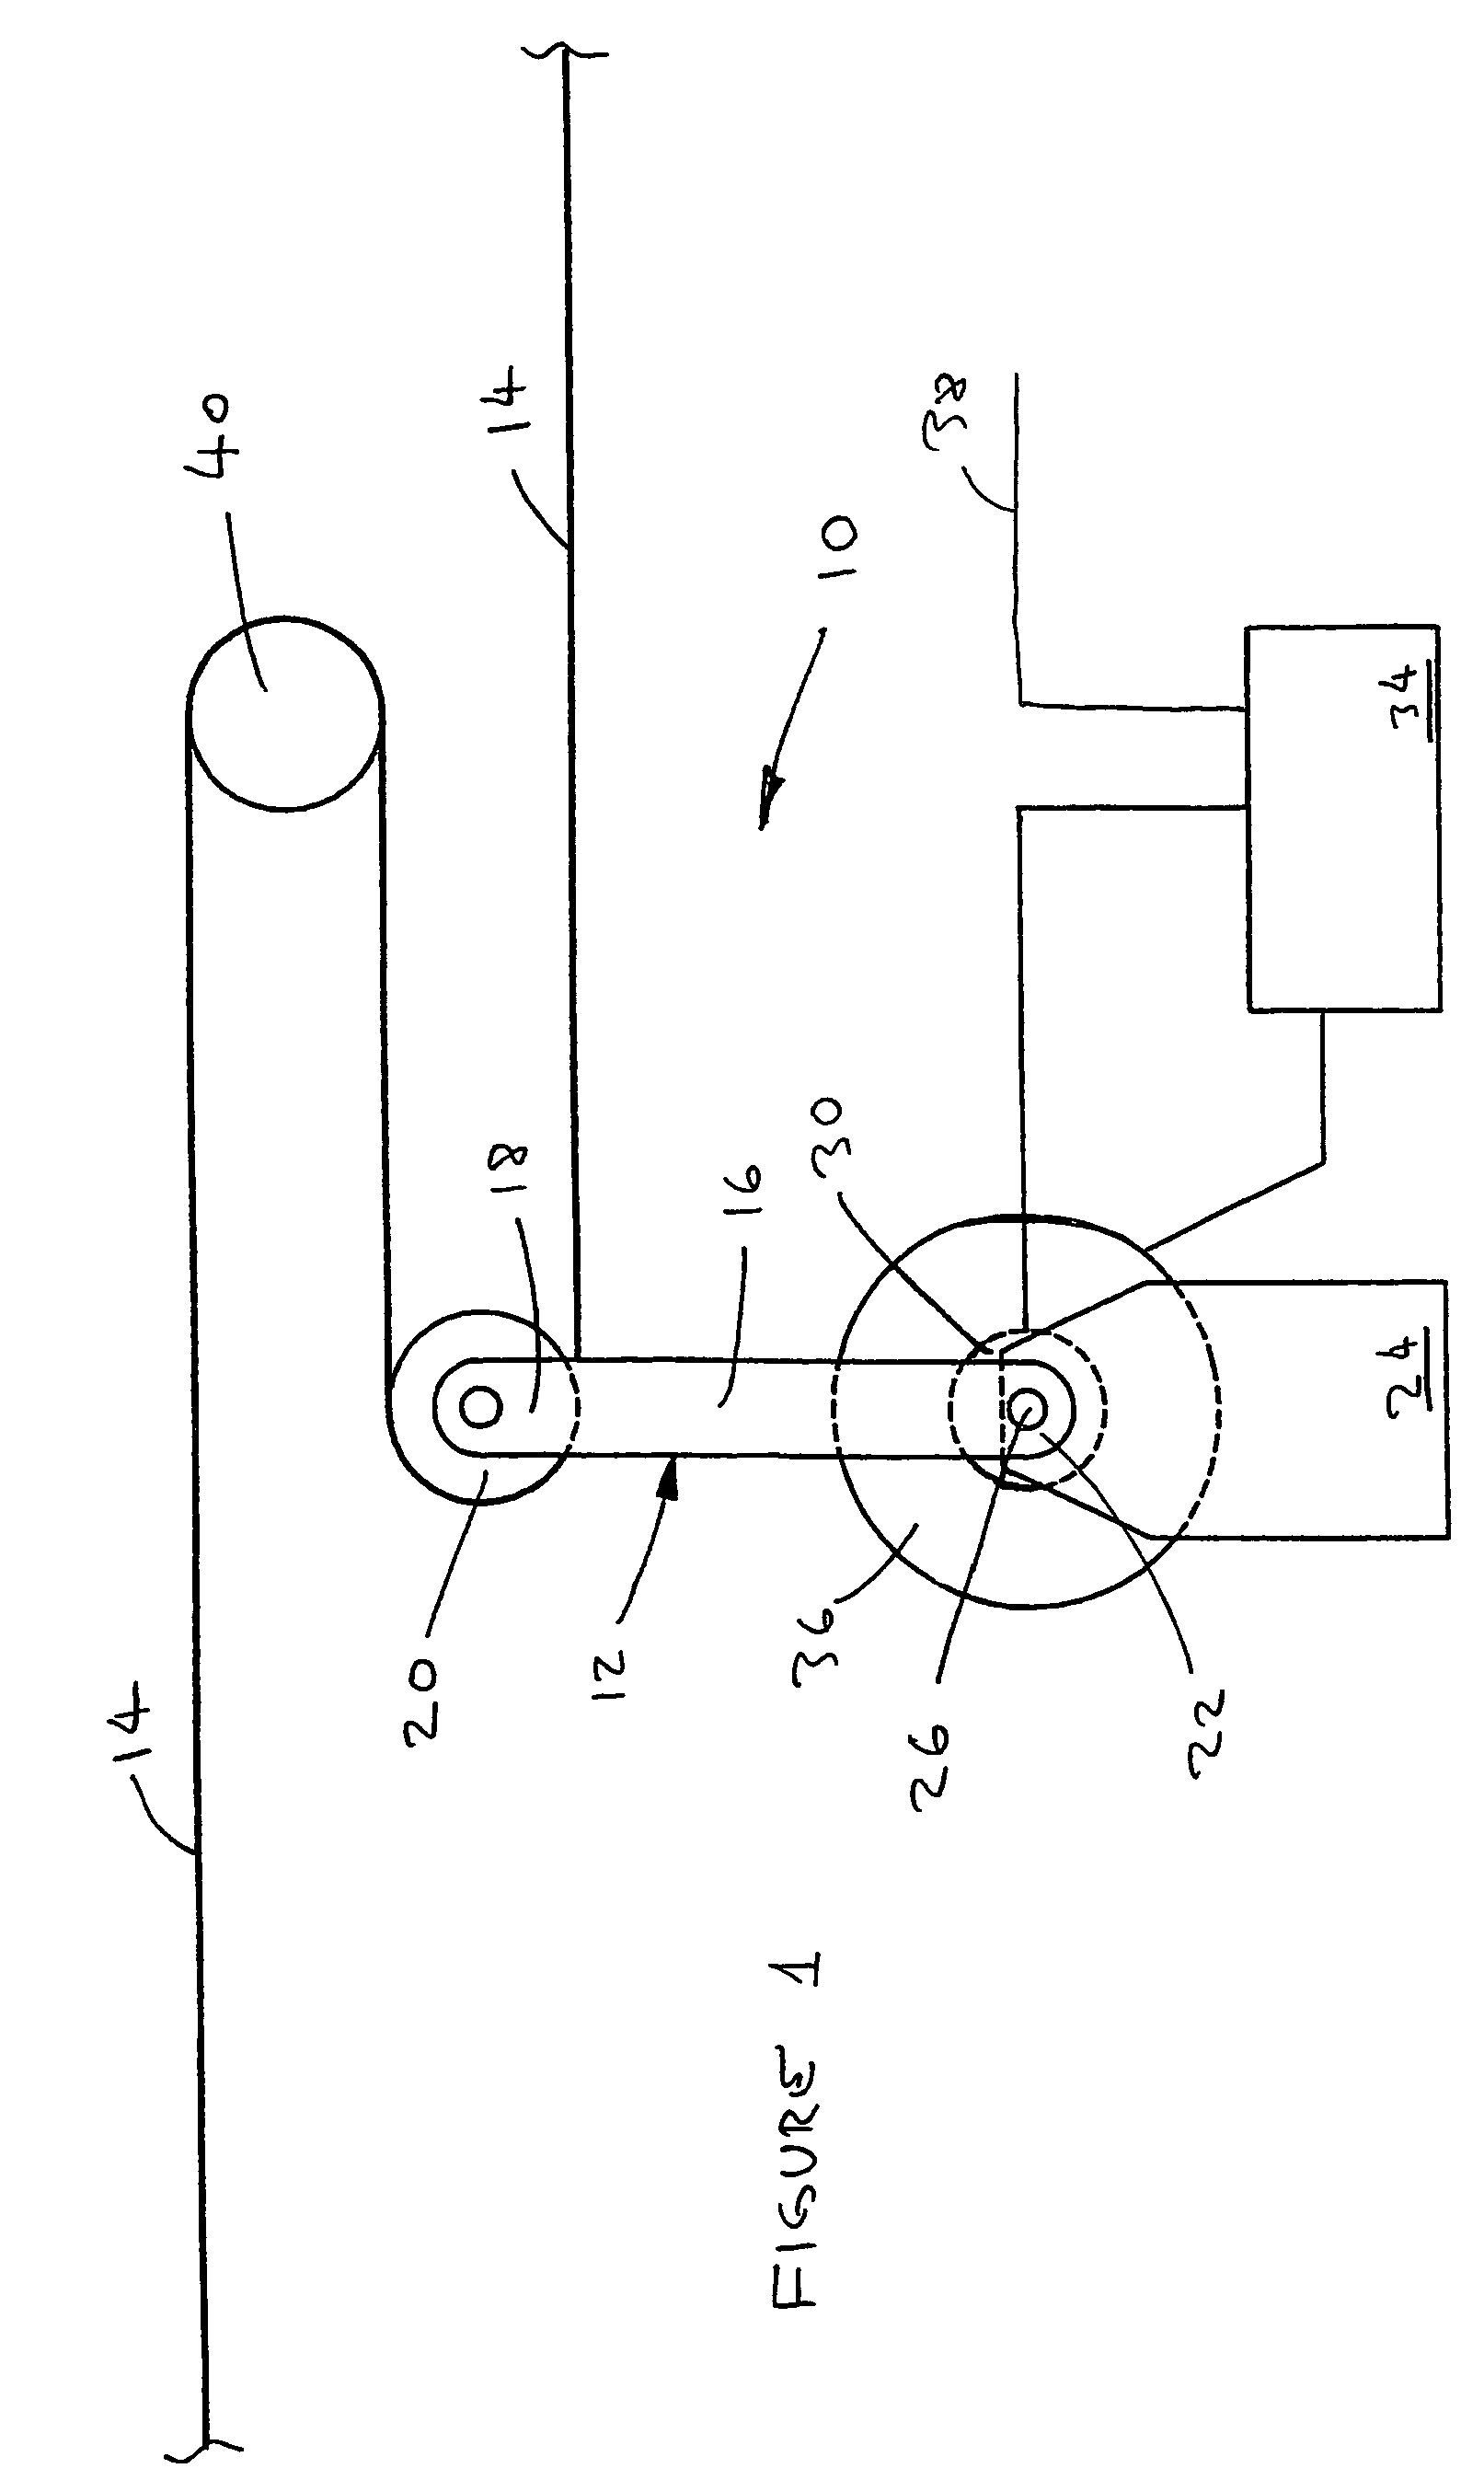 Web tensioning device with plural control inputs